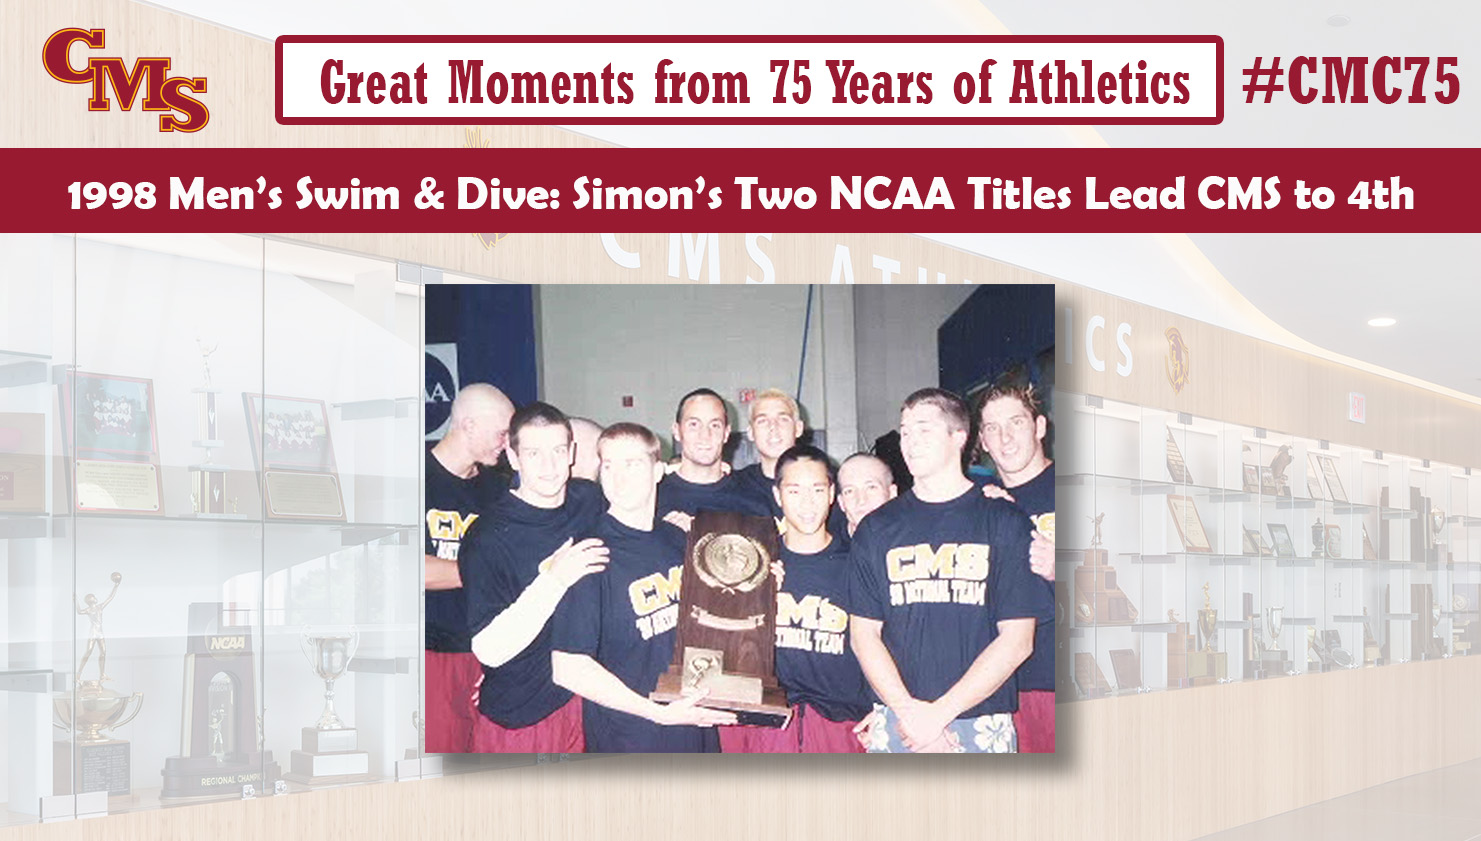 The team holds its fourth place trophy. Words over the photo read: Great Moments from 75 Years of Athletics. 1998 Men's Swim & Dive: Simon's Two NCAA Titles Lead CMS to 4th